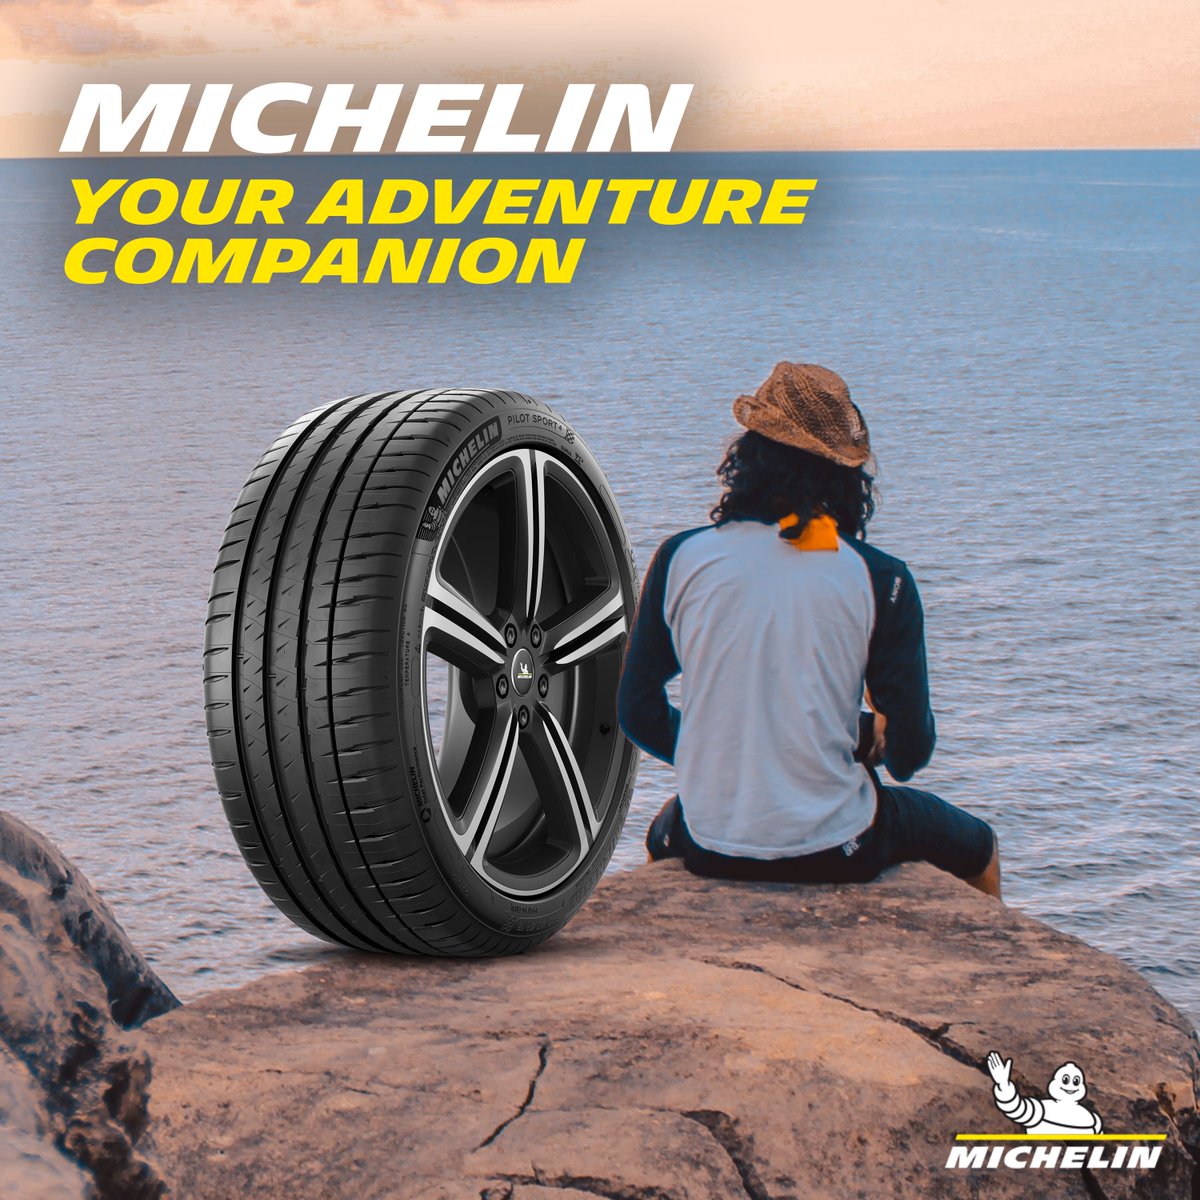 Enhance your travel with your adventure companion, MICHELIN tyres, transforming every ordinary journey into an extraordinary adventure.

#MichelinJourneys #TravelWithConfidence